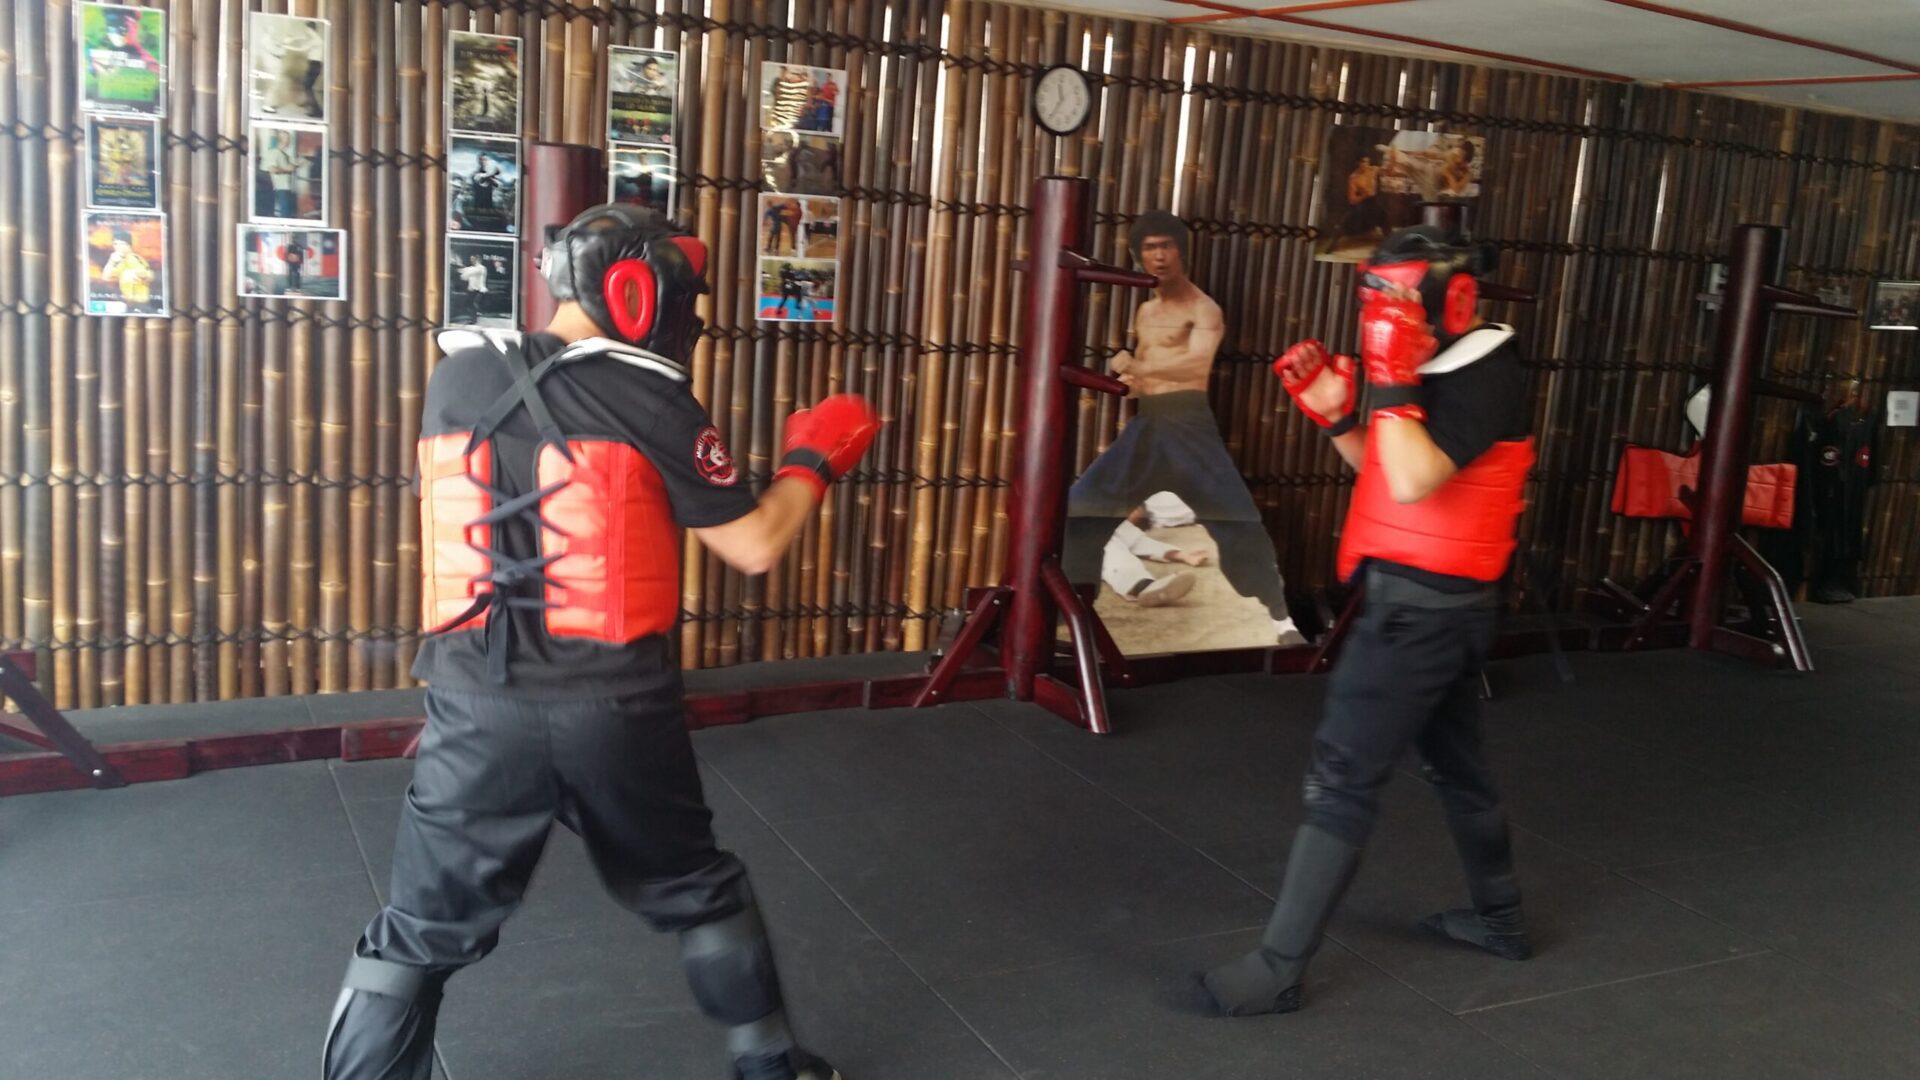 Students sparing in Wing Chun class